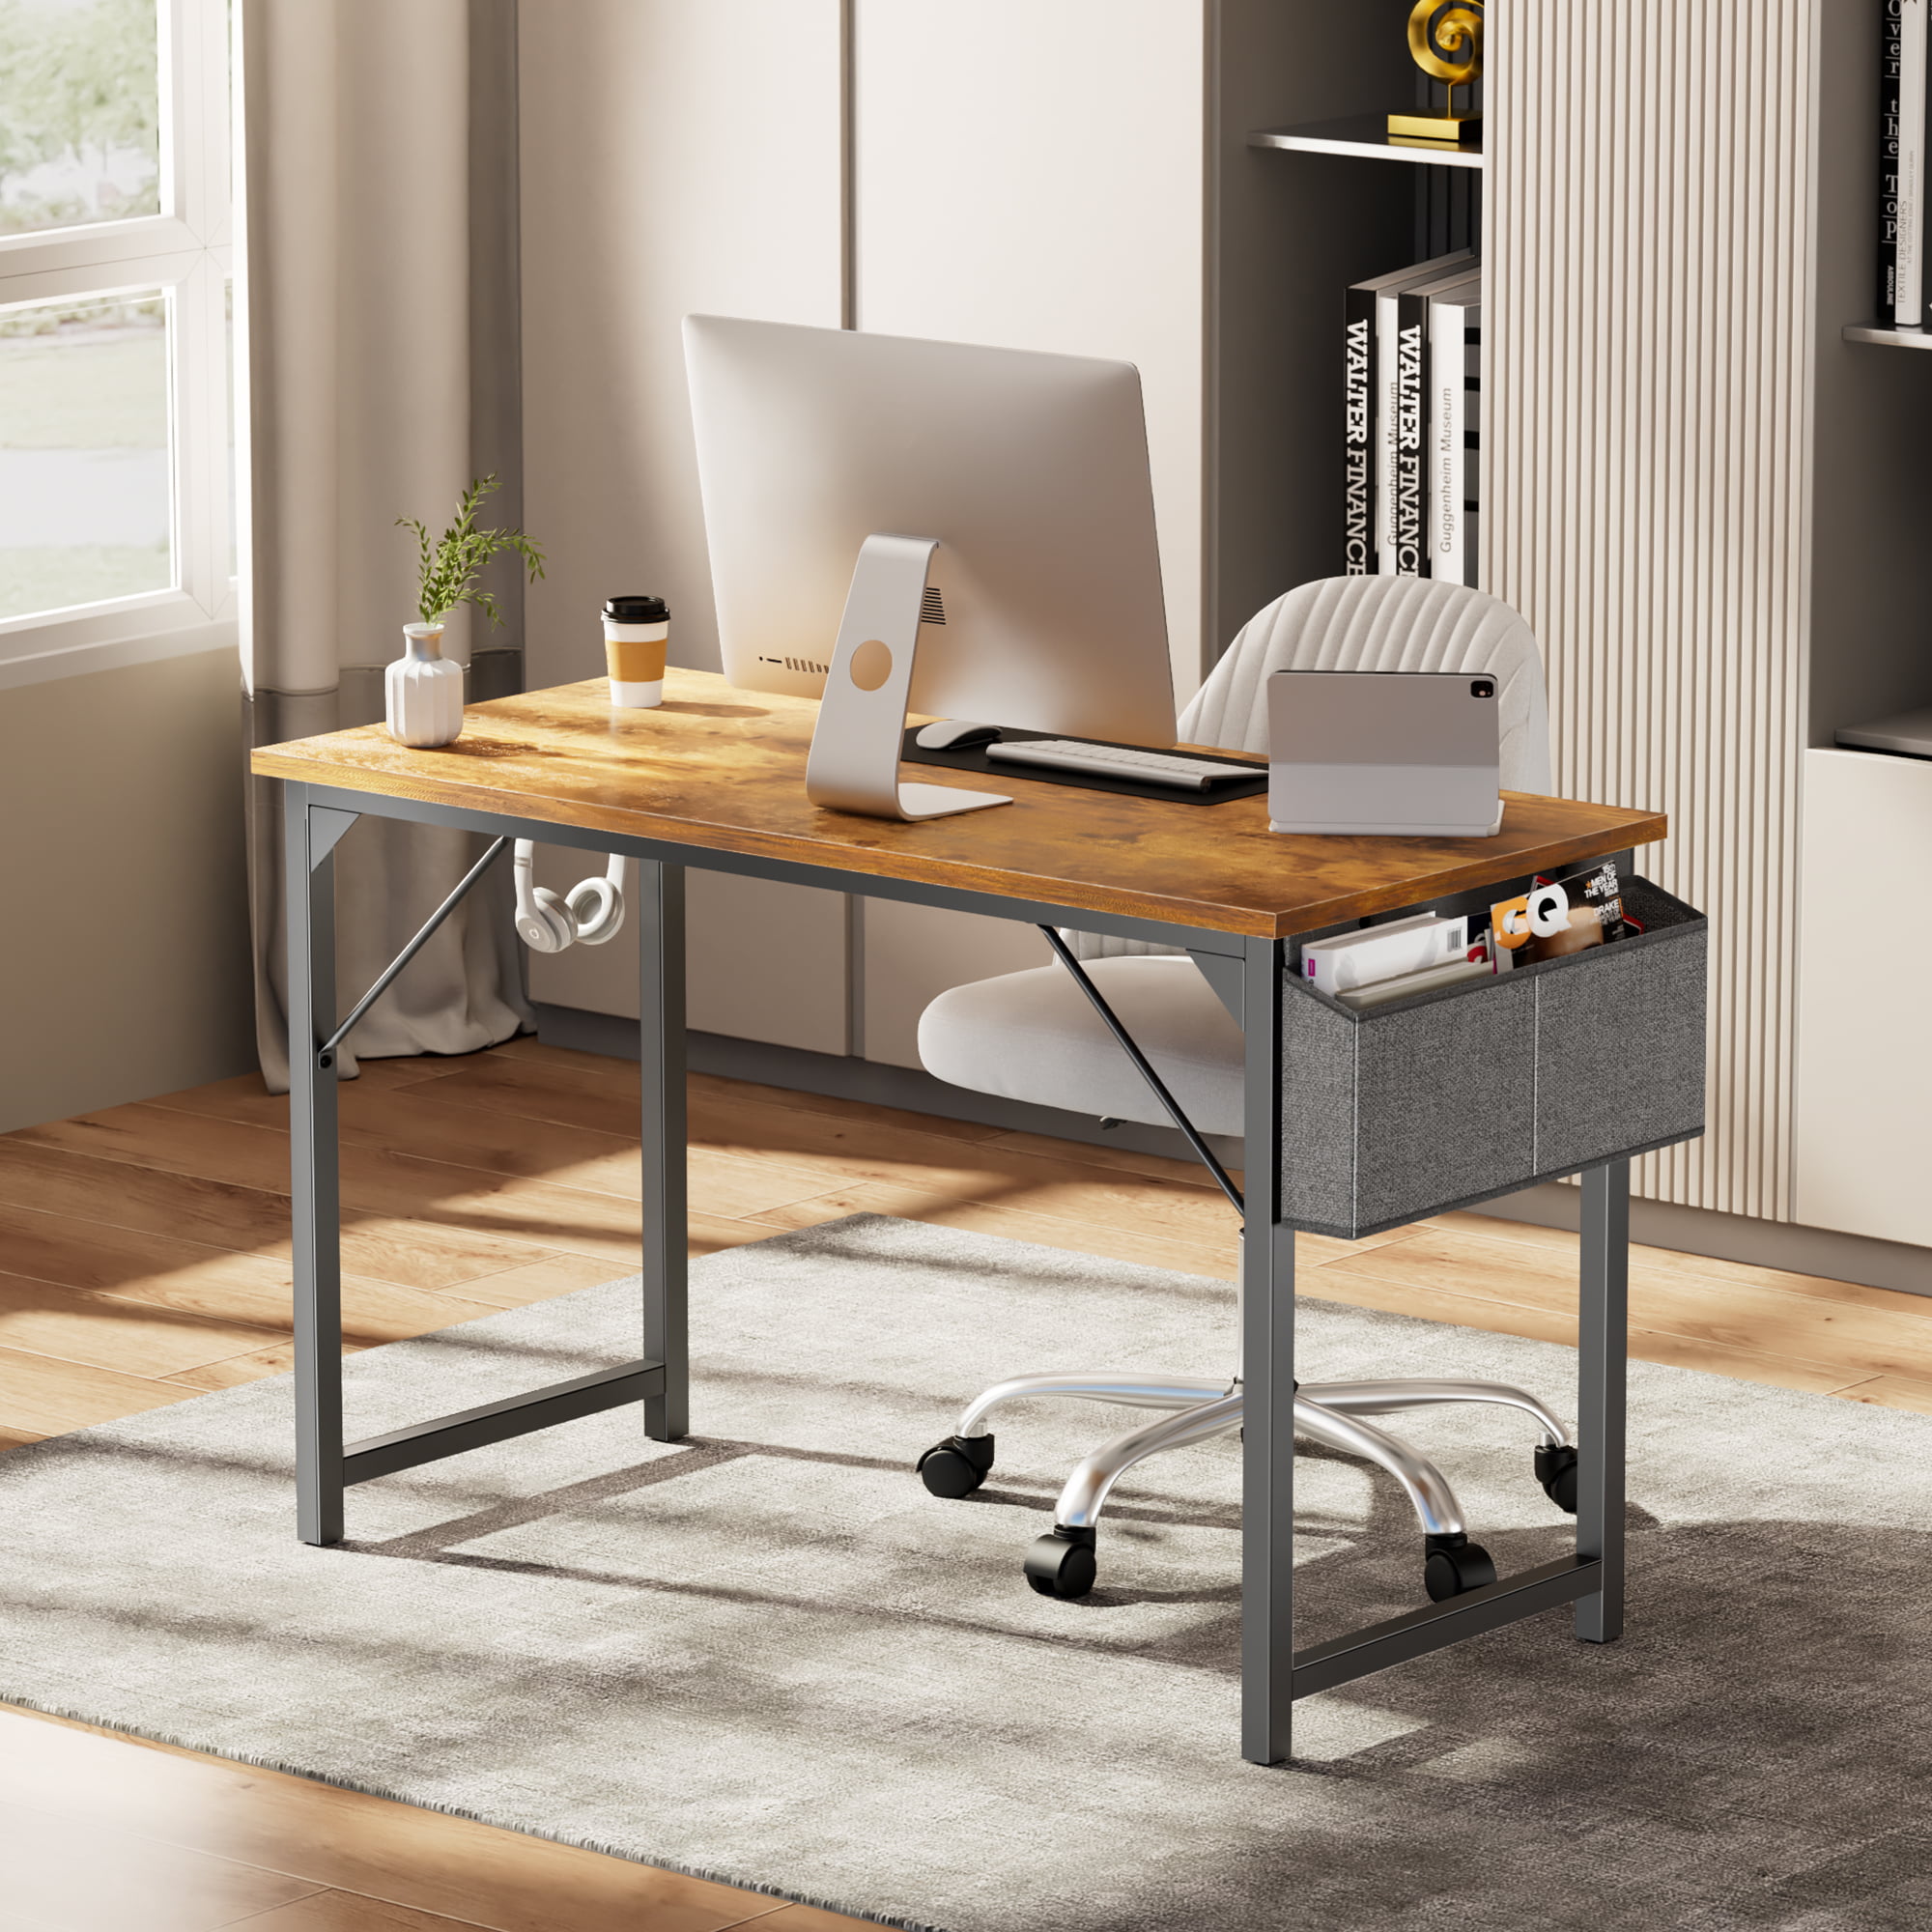 Office Computer Table,100 * 55cm Study Writing Desk,Simple Style